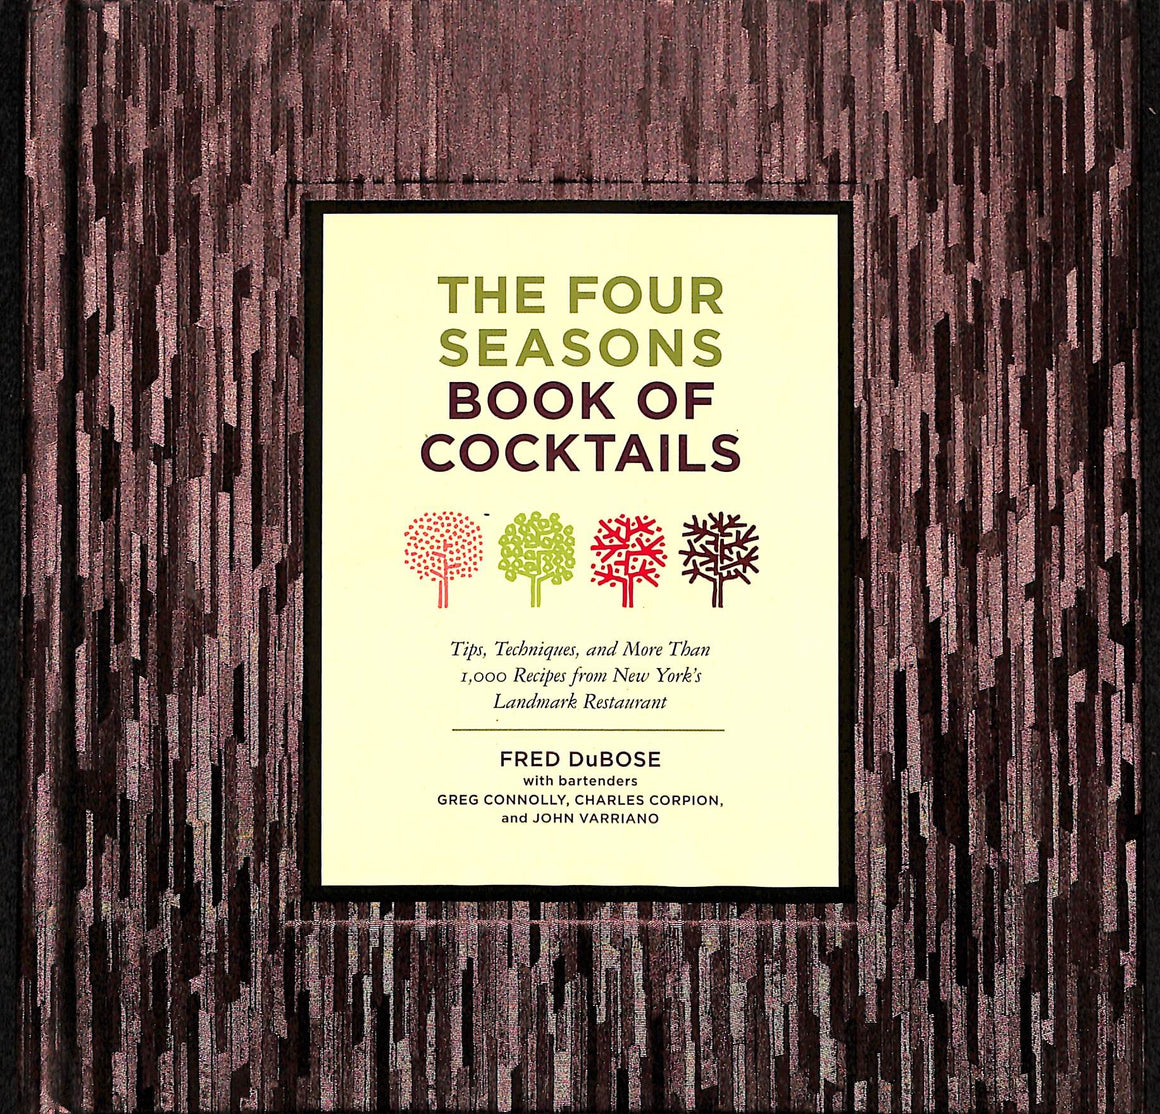 'The Four Seasons Book of Cocktails' by Fred DuBose